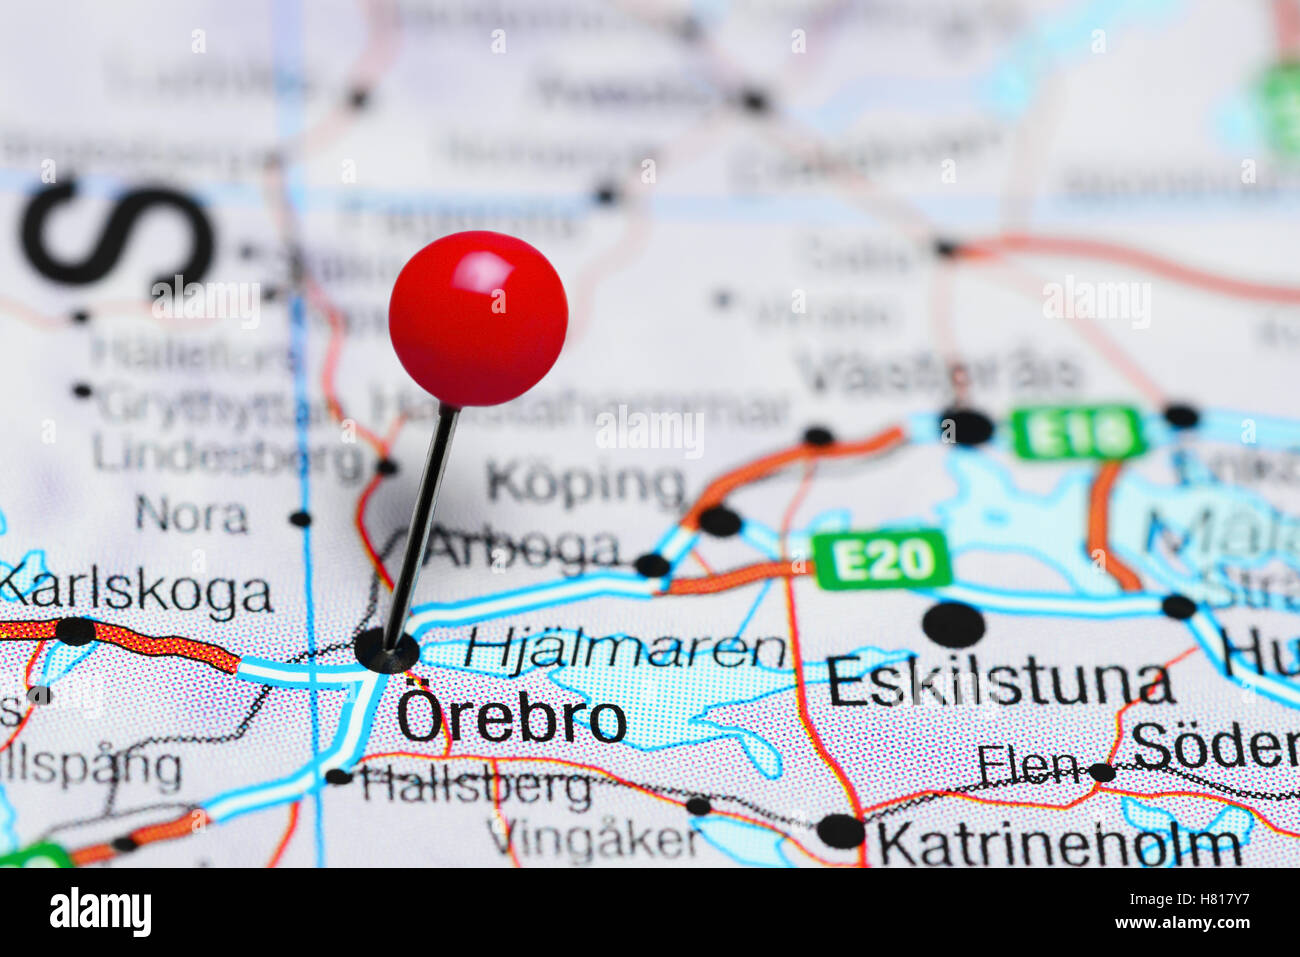 Orebro pinned on a map of Sweden Stock Photo